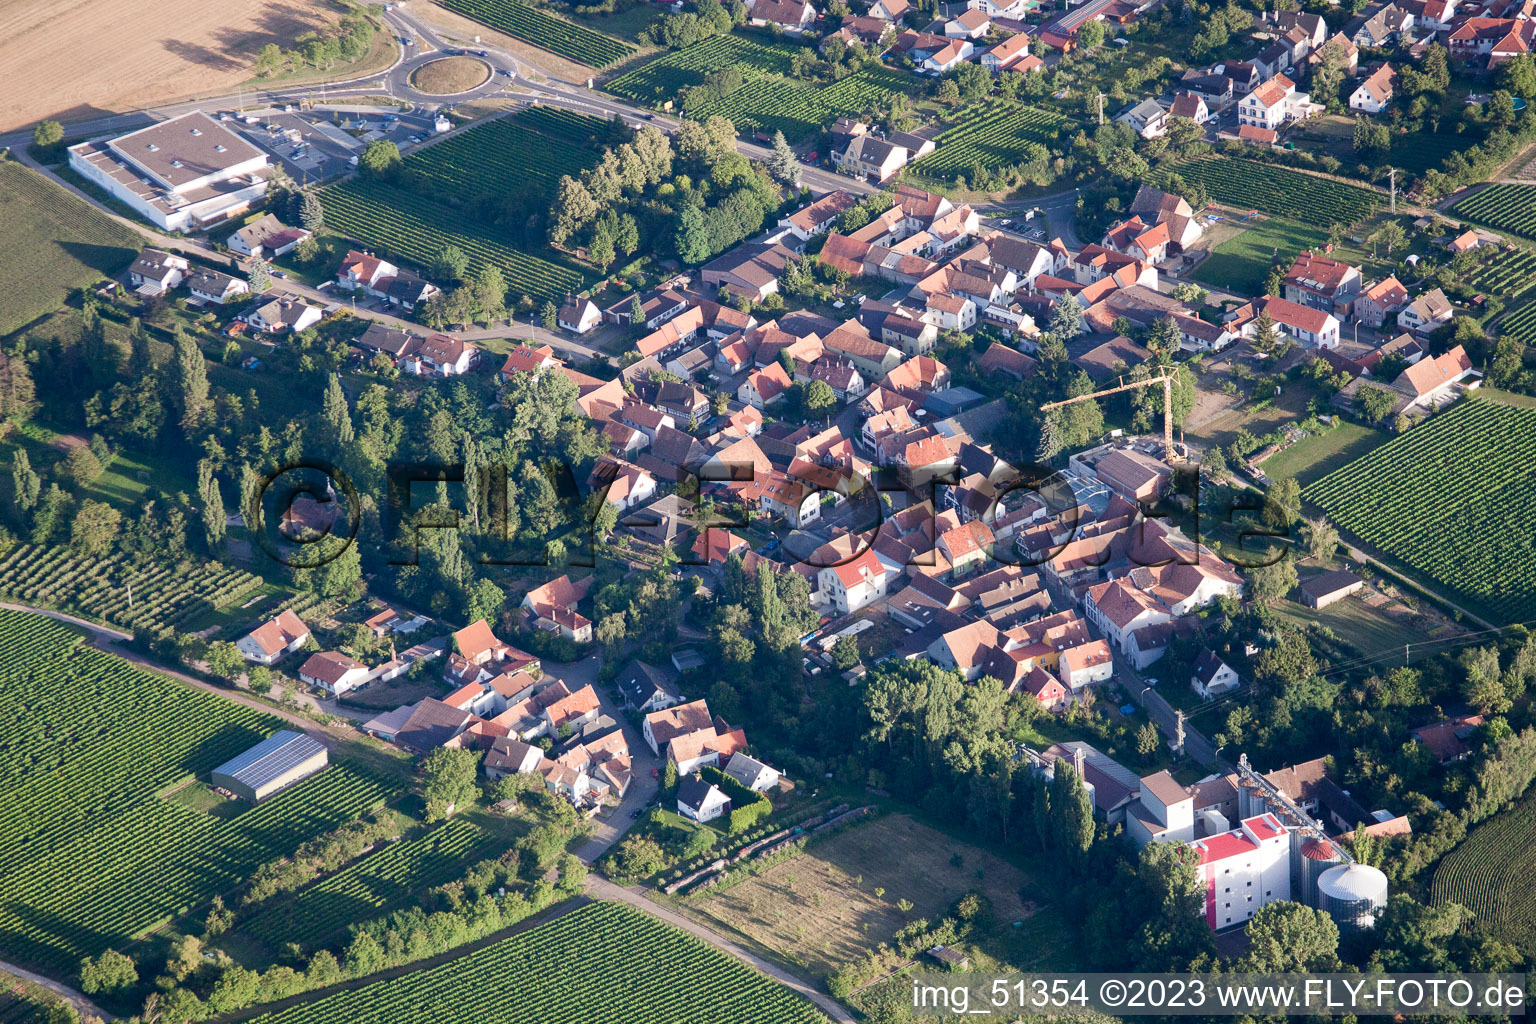 District Appenhofen in Billigheim-Ingenheim in the state Rhineland-Palatinate, Germany out of the air